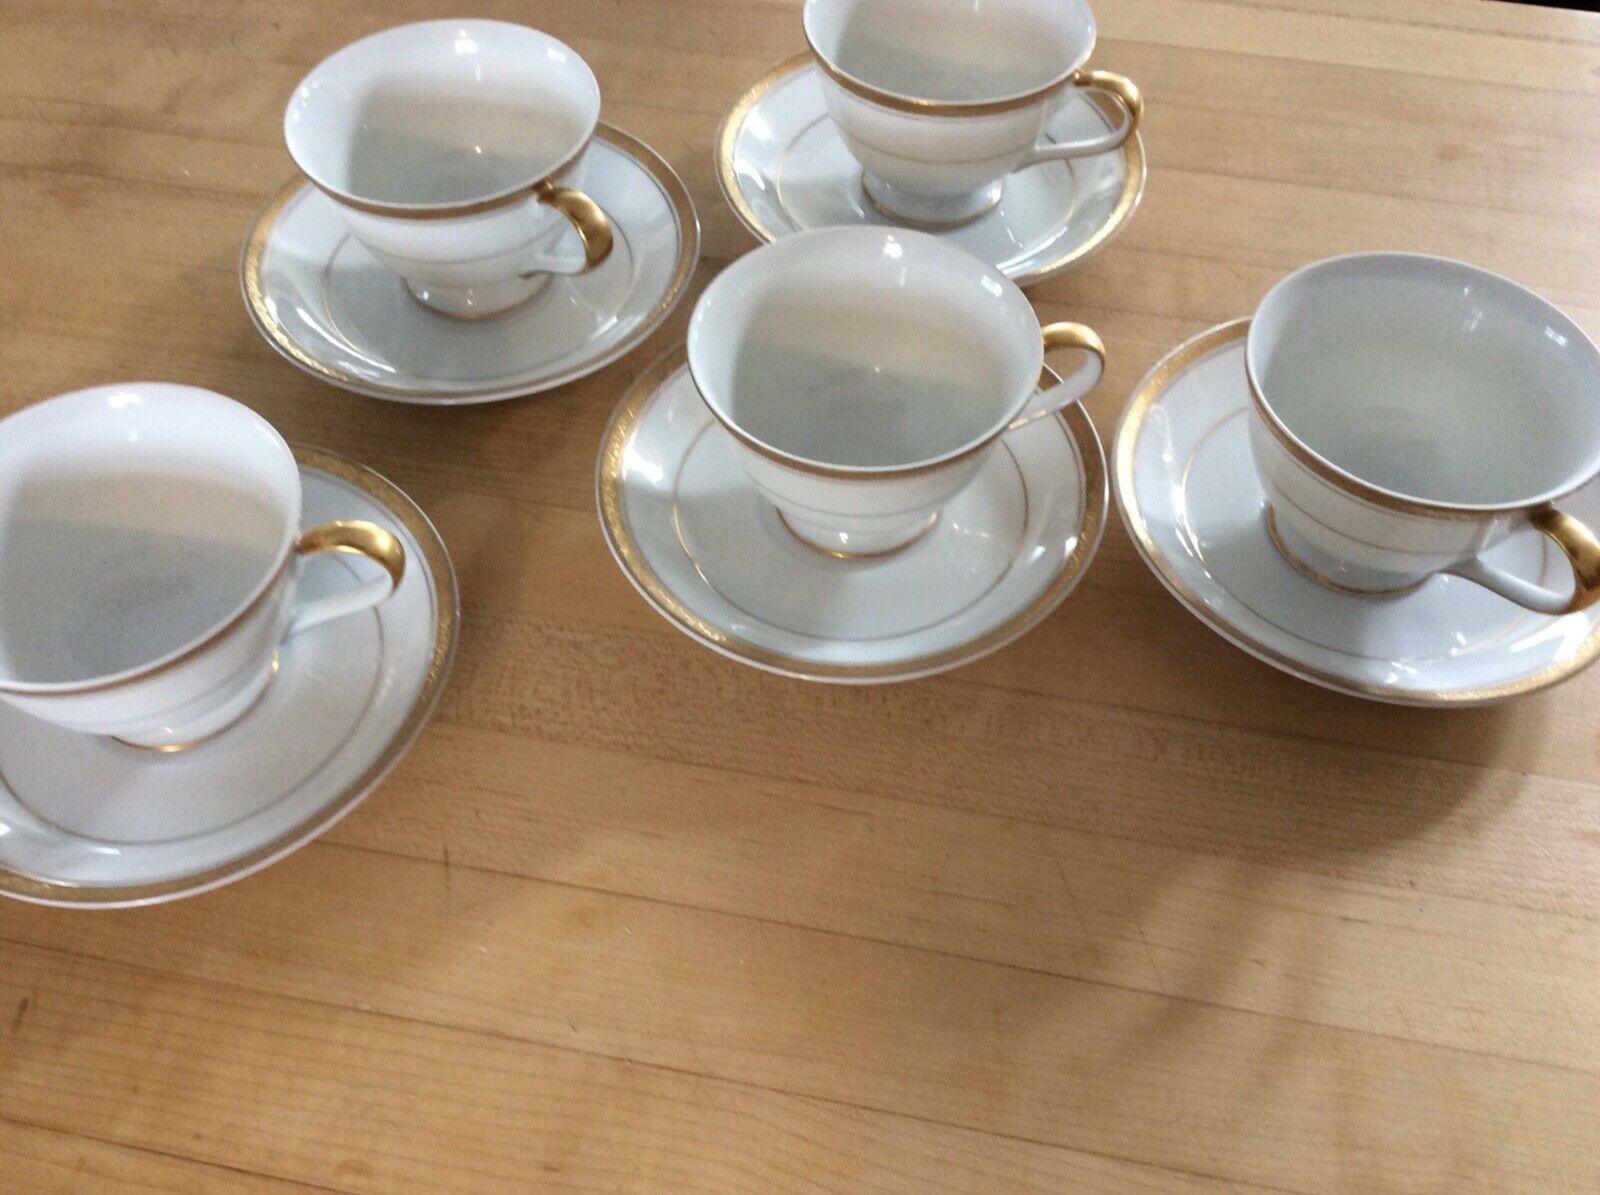 Royal  fine Bone China Made In Japan 5 Cup And Saucer Sets